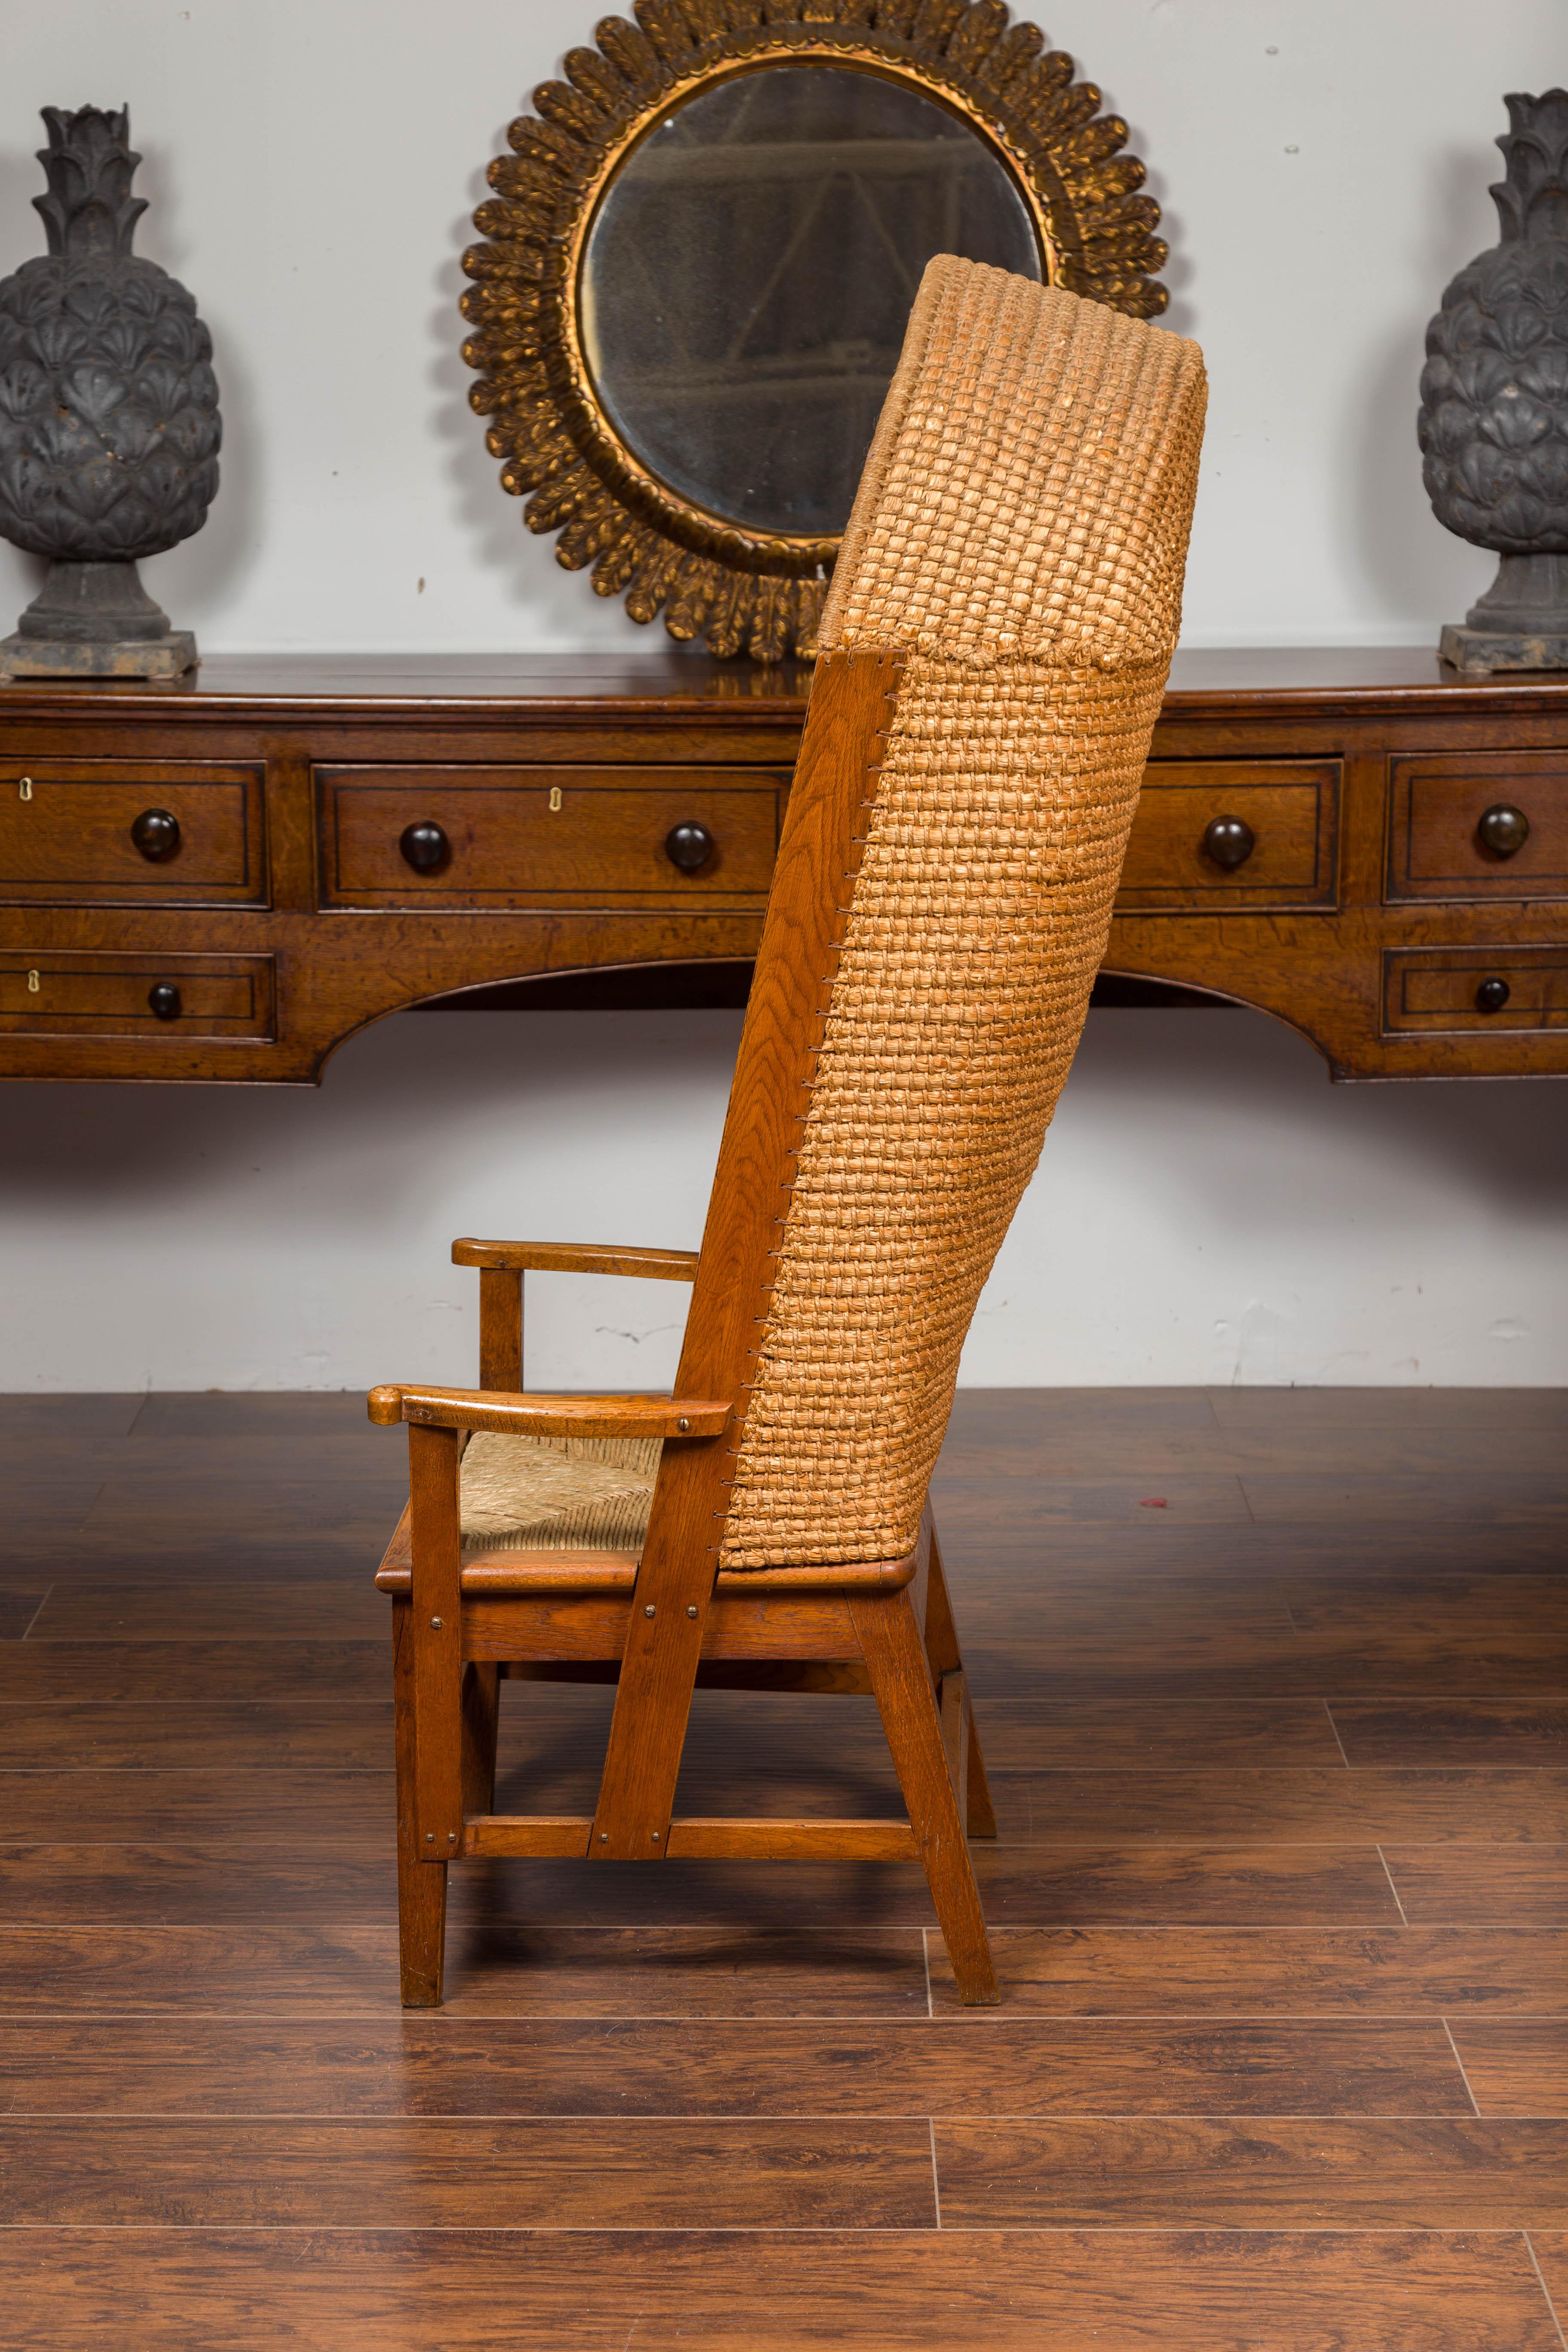 Scottish 1900s Orkney Island Canopy Chair with Hooded Handwoven Straw Back For Sale 2